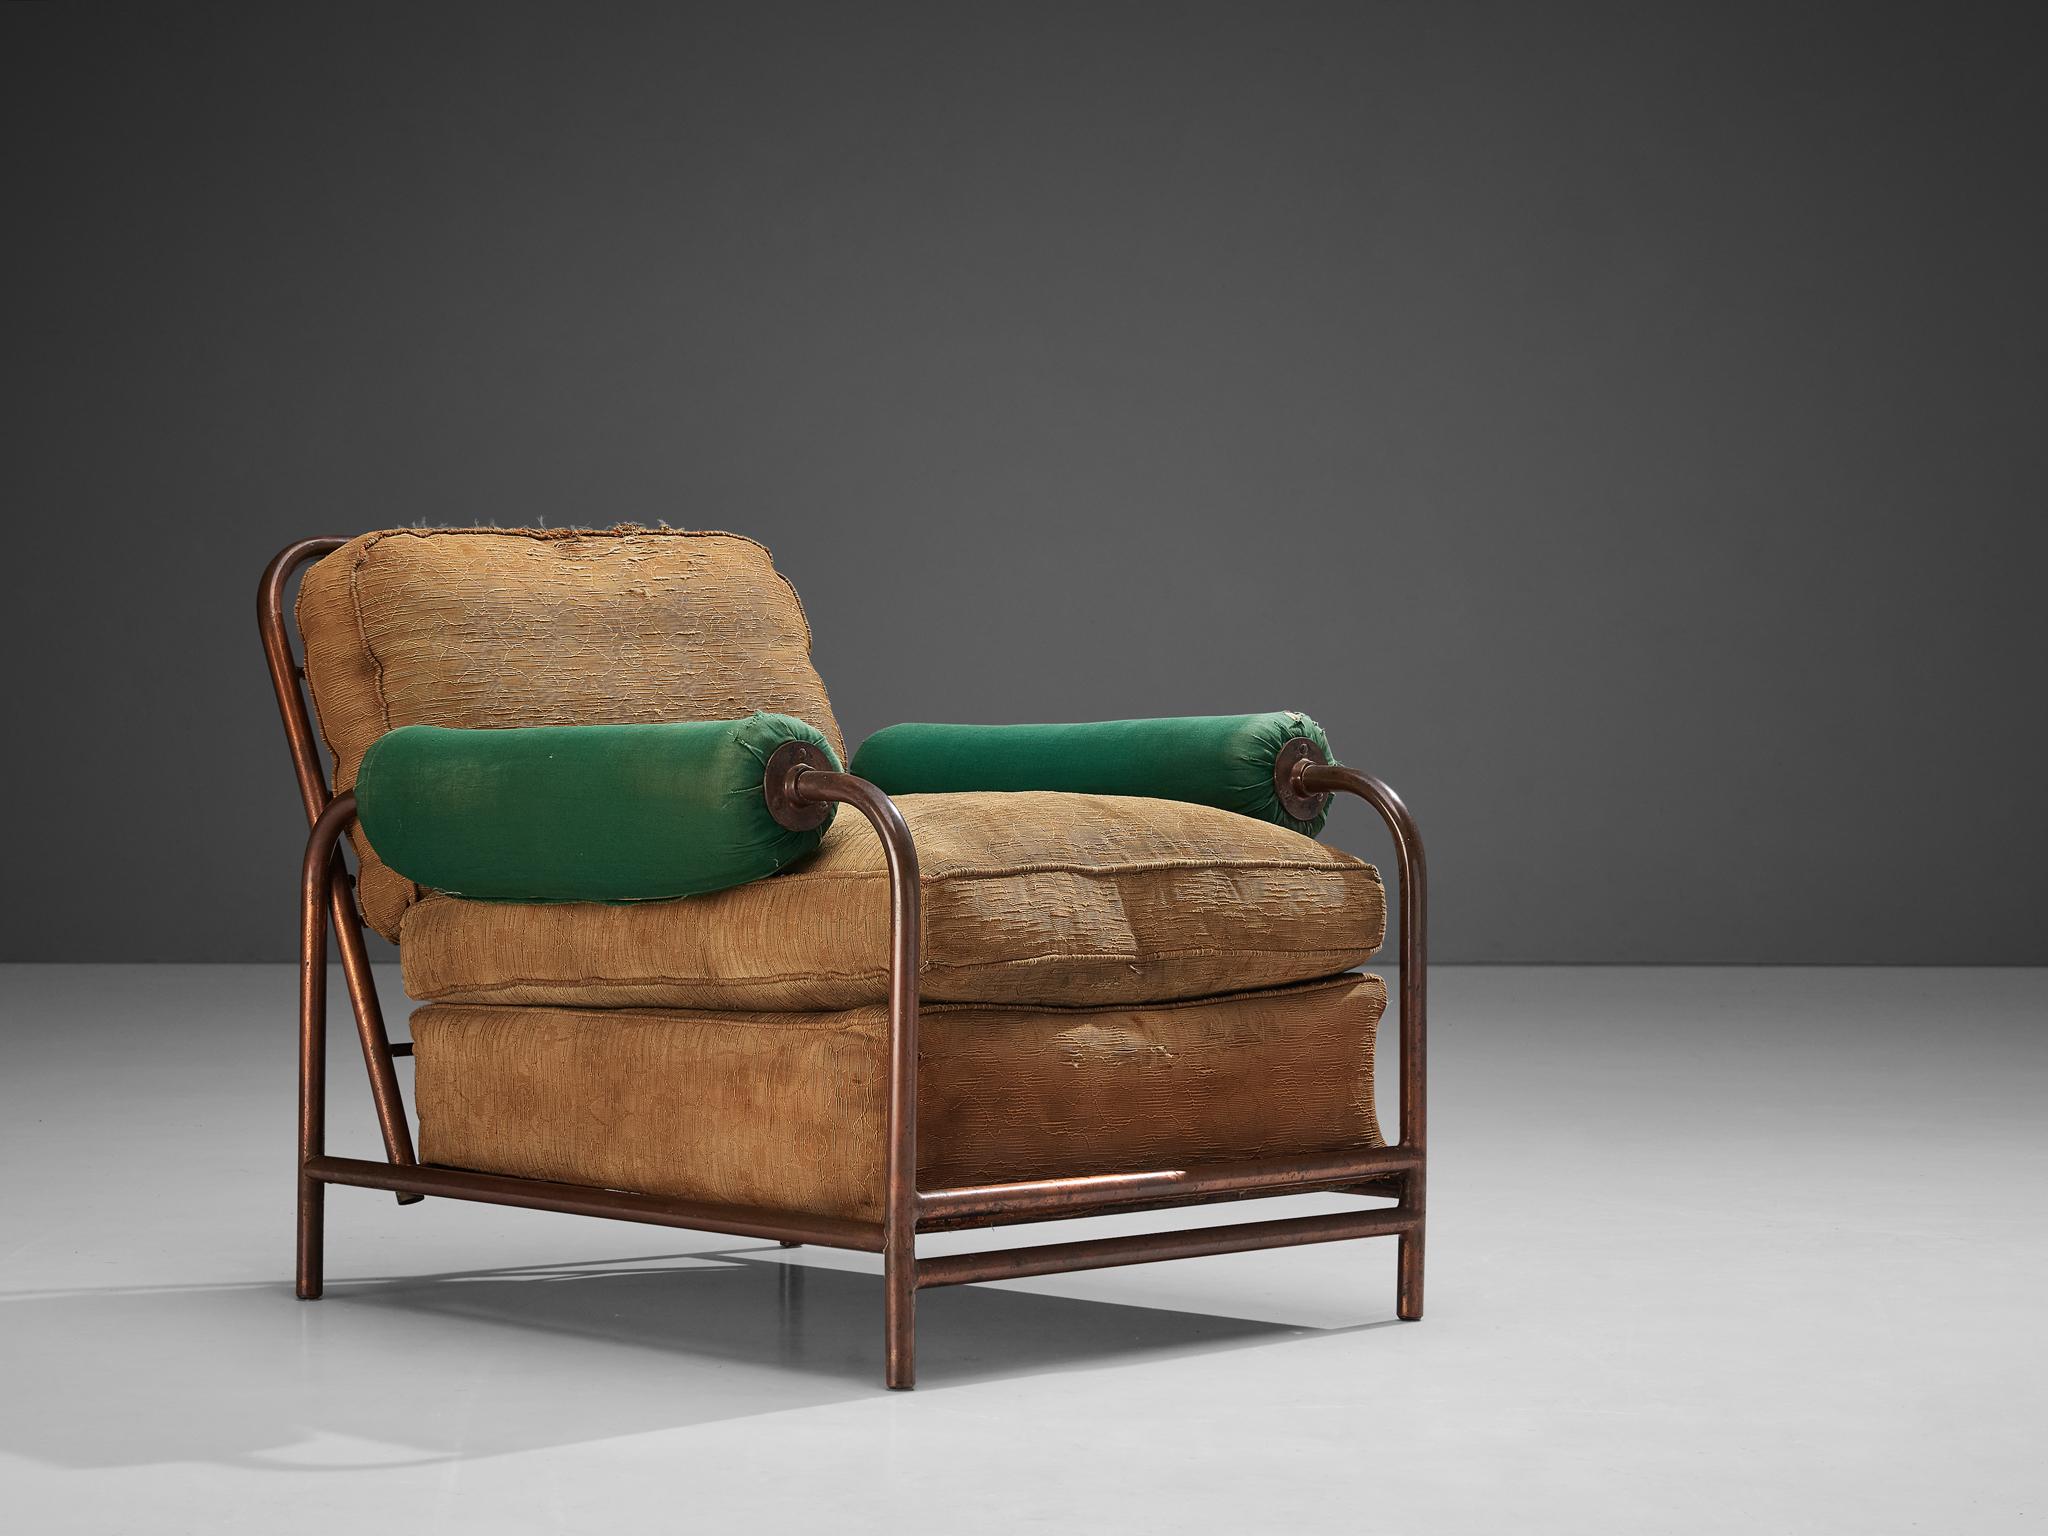 Donald Deskey for Ypsilanti Reed Furniture Company, fabric, copper, United States, designed c. 1929

This rare and eccentric lounge chair is designed by Donald Deskey for Ypsilanti Reed Furniture Company. The tubular frame is executed in copper